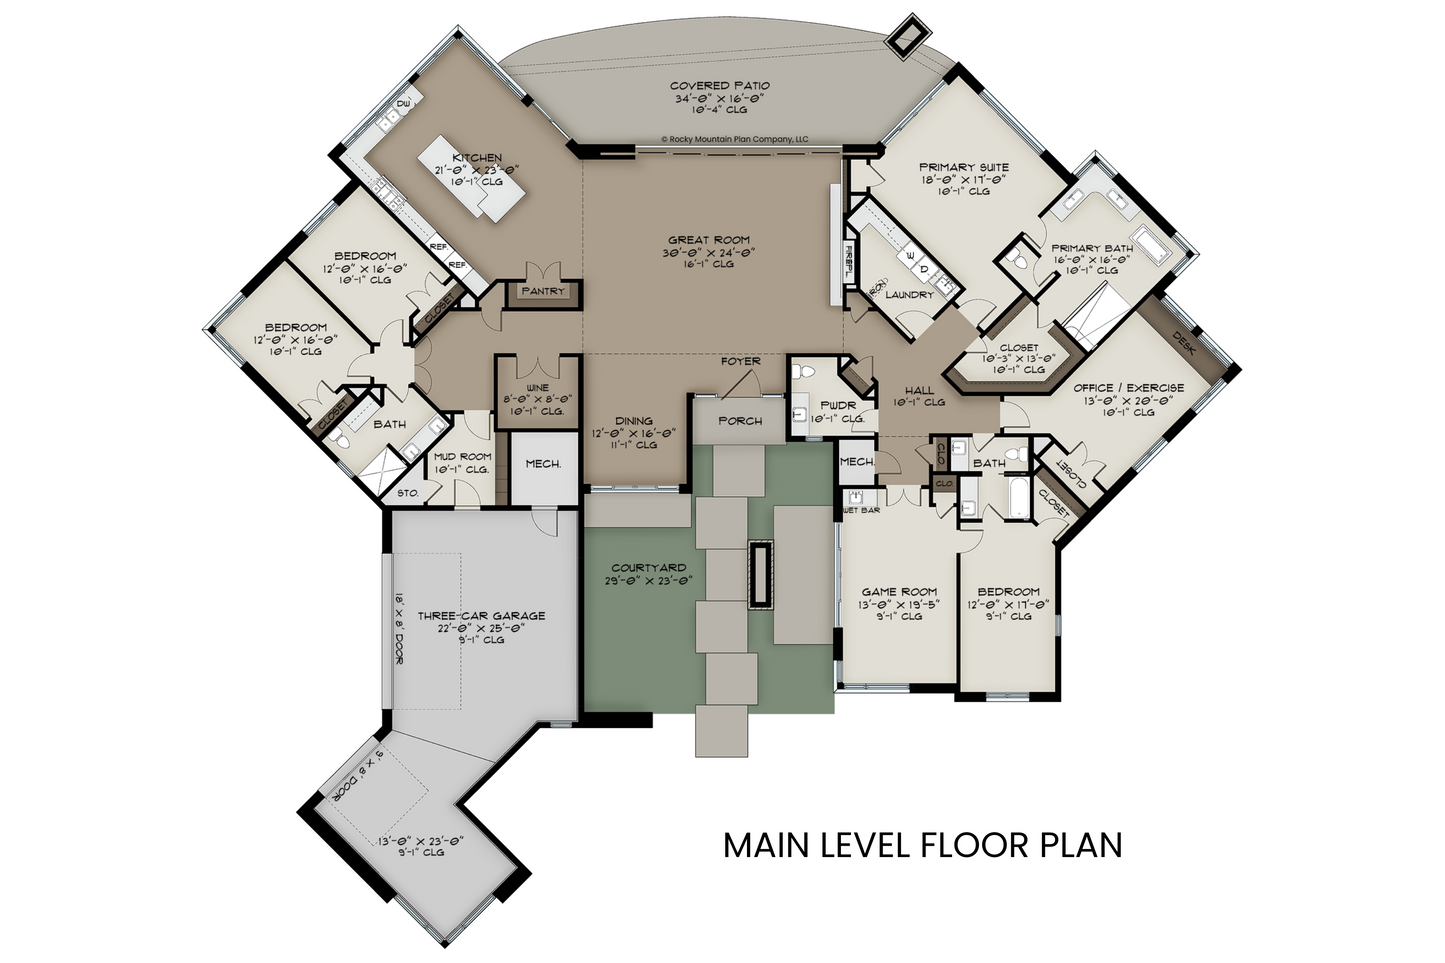 Modern-Minimalist-Ranch-Plan-for-Wide-Sites-Main-Level-Floor-Plan-Rocky-Mountain-Plan-Company-Crescent-Lake